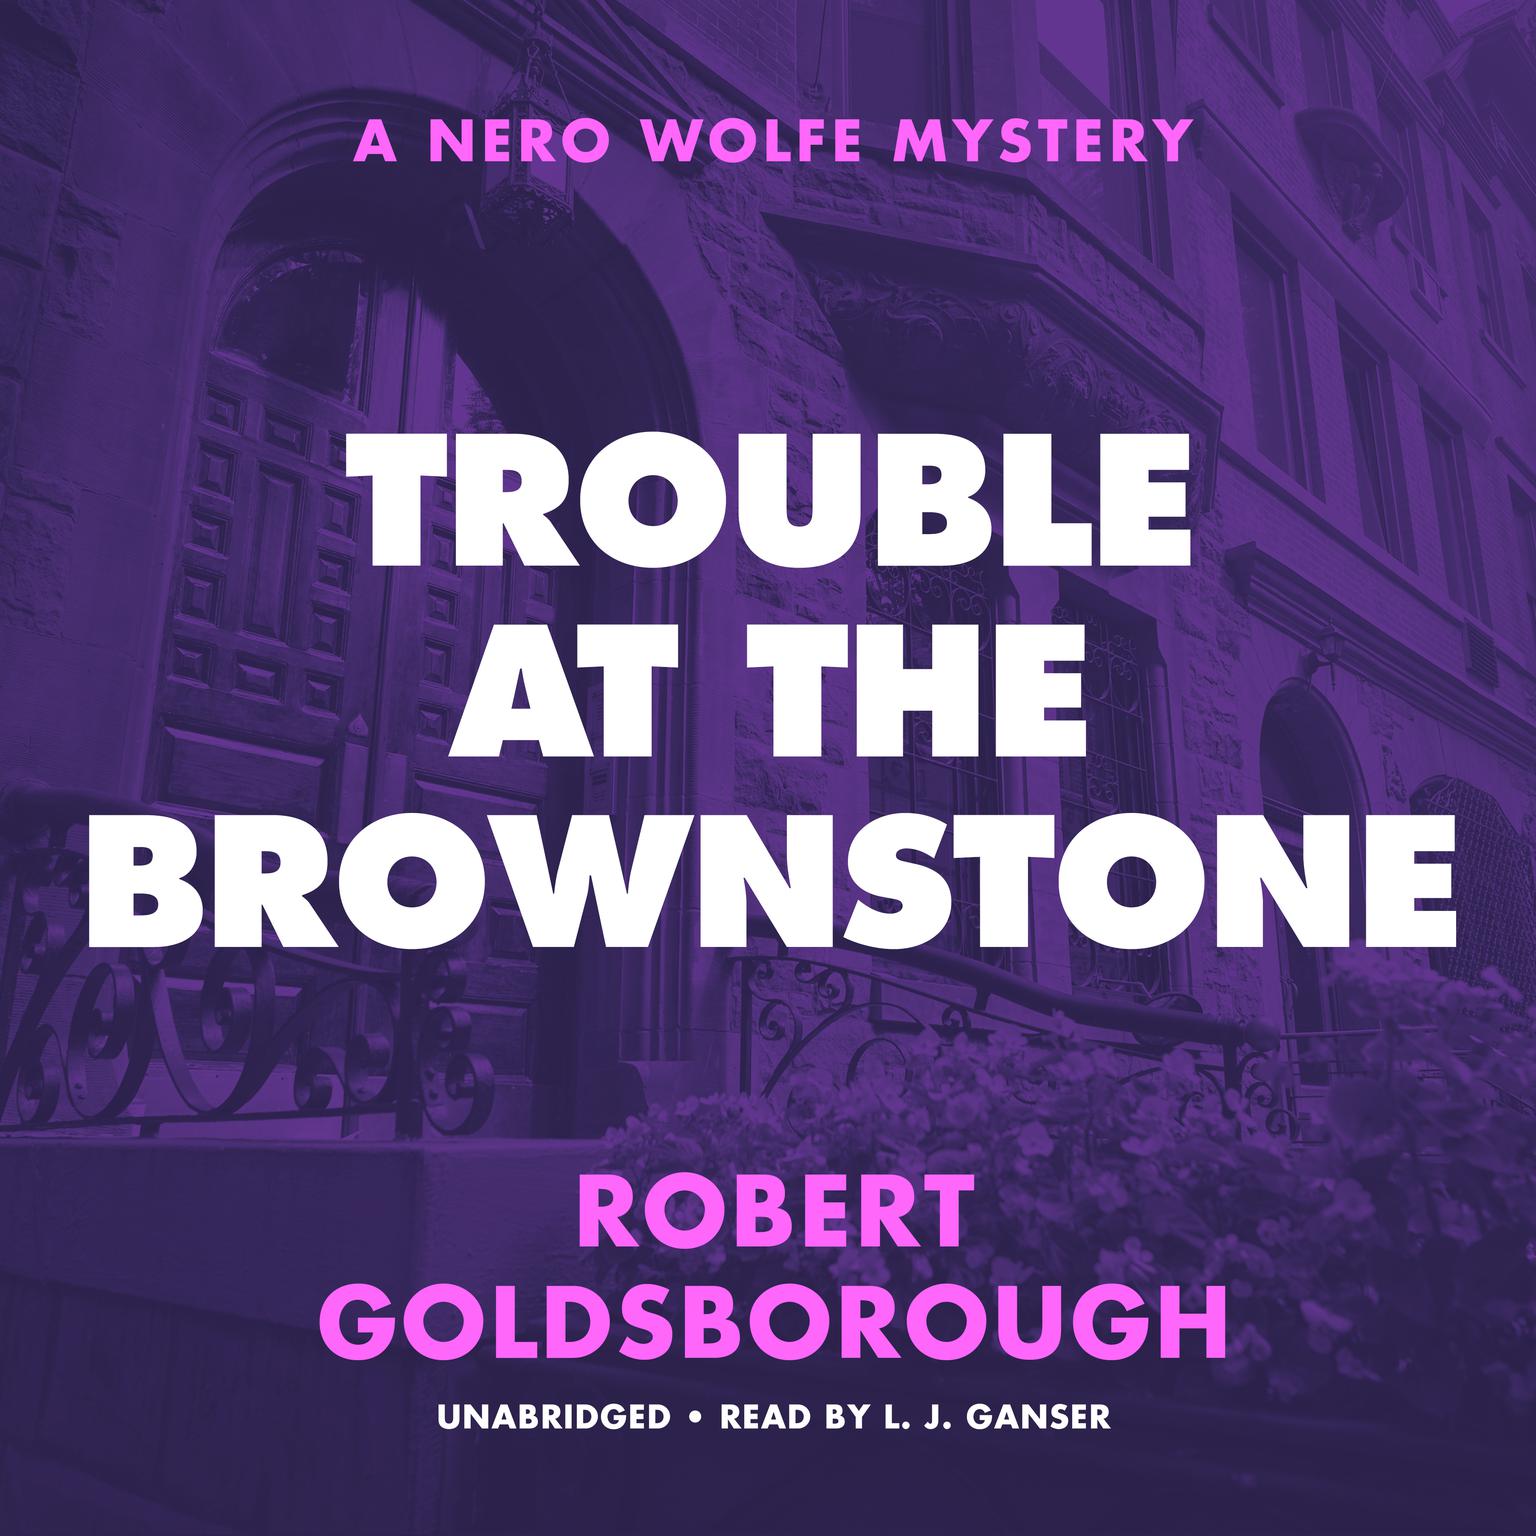 Trouble at the Brownstone: A Nero Wolfe Mystery Audiobook, by Robert Goldsborough